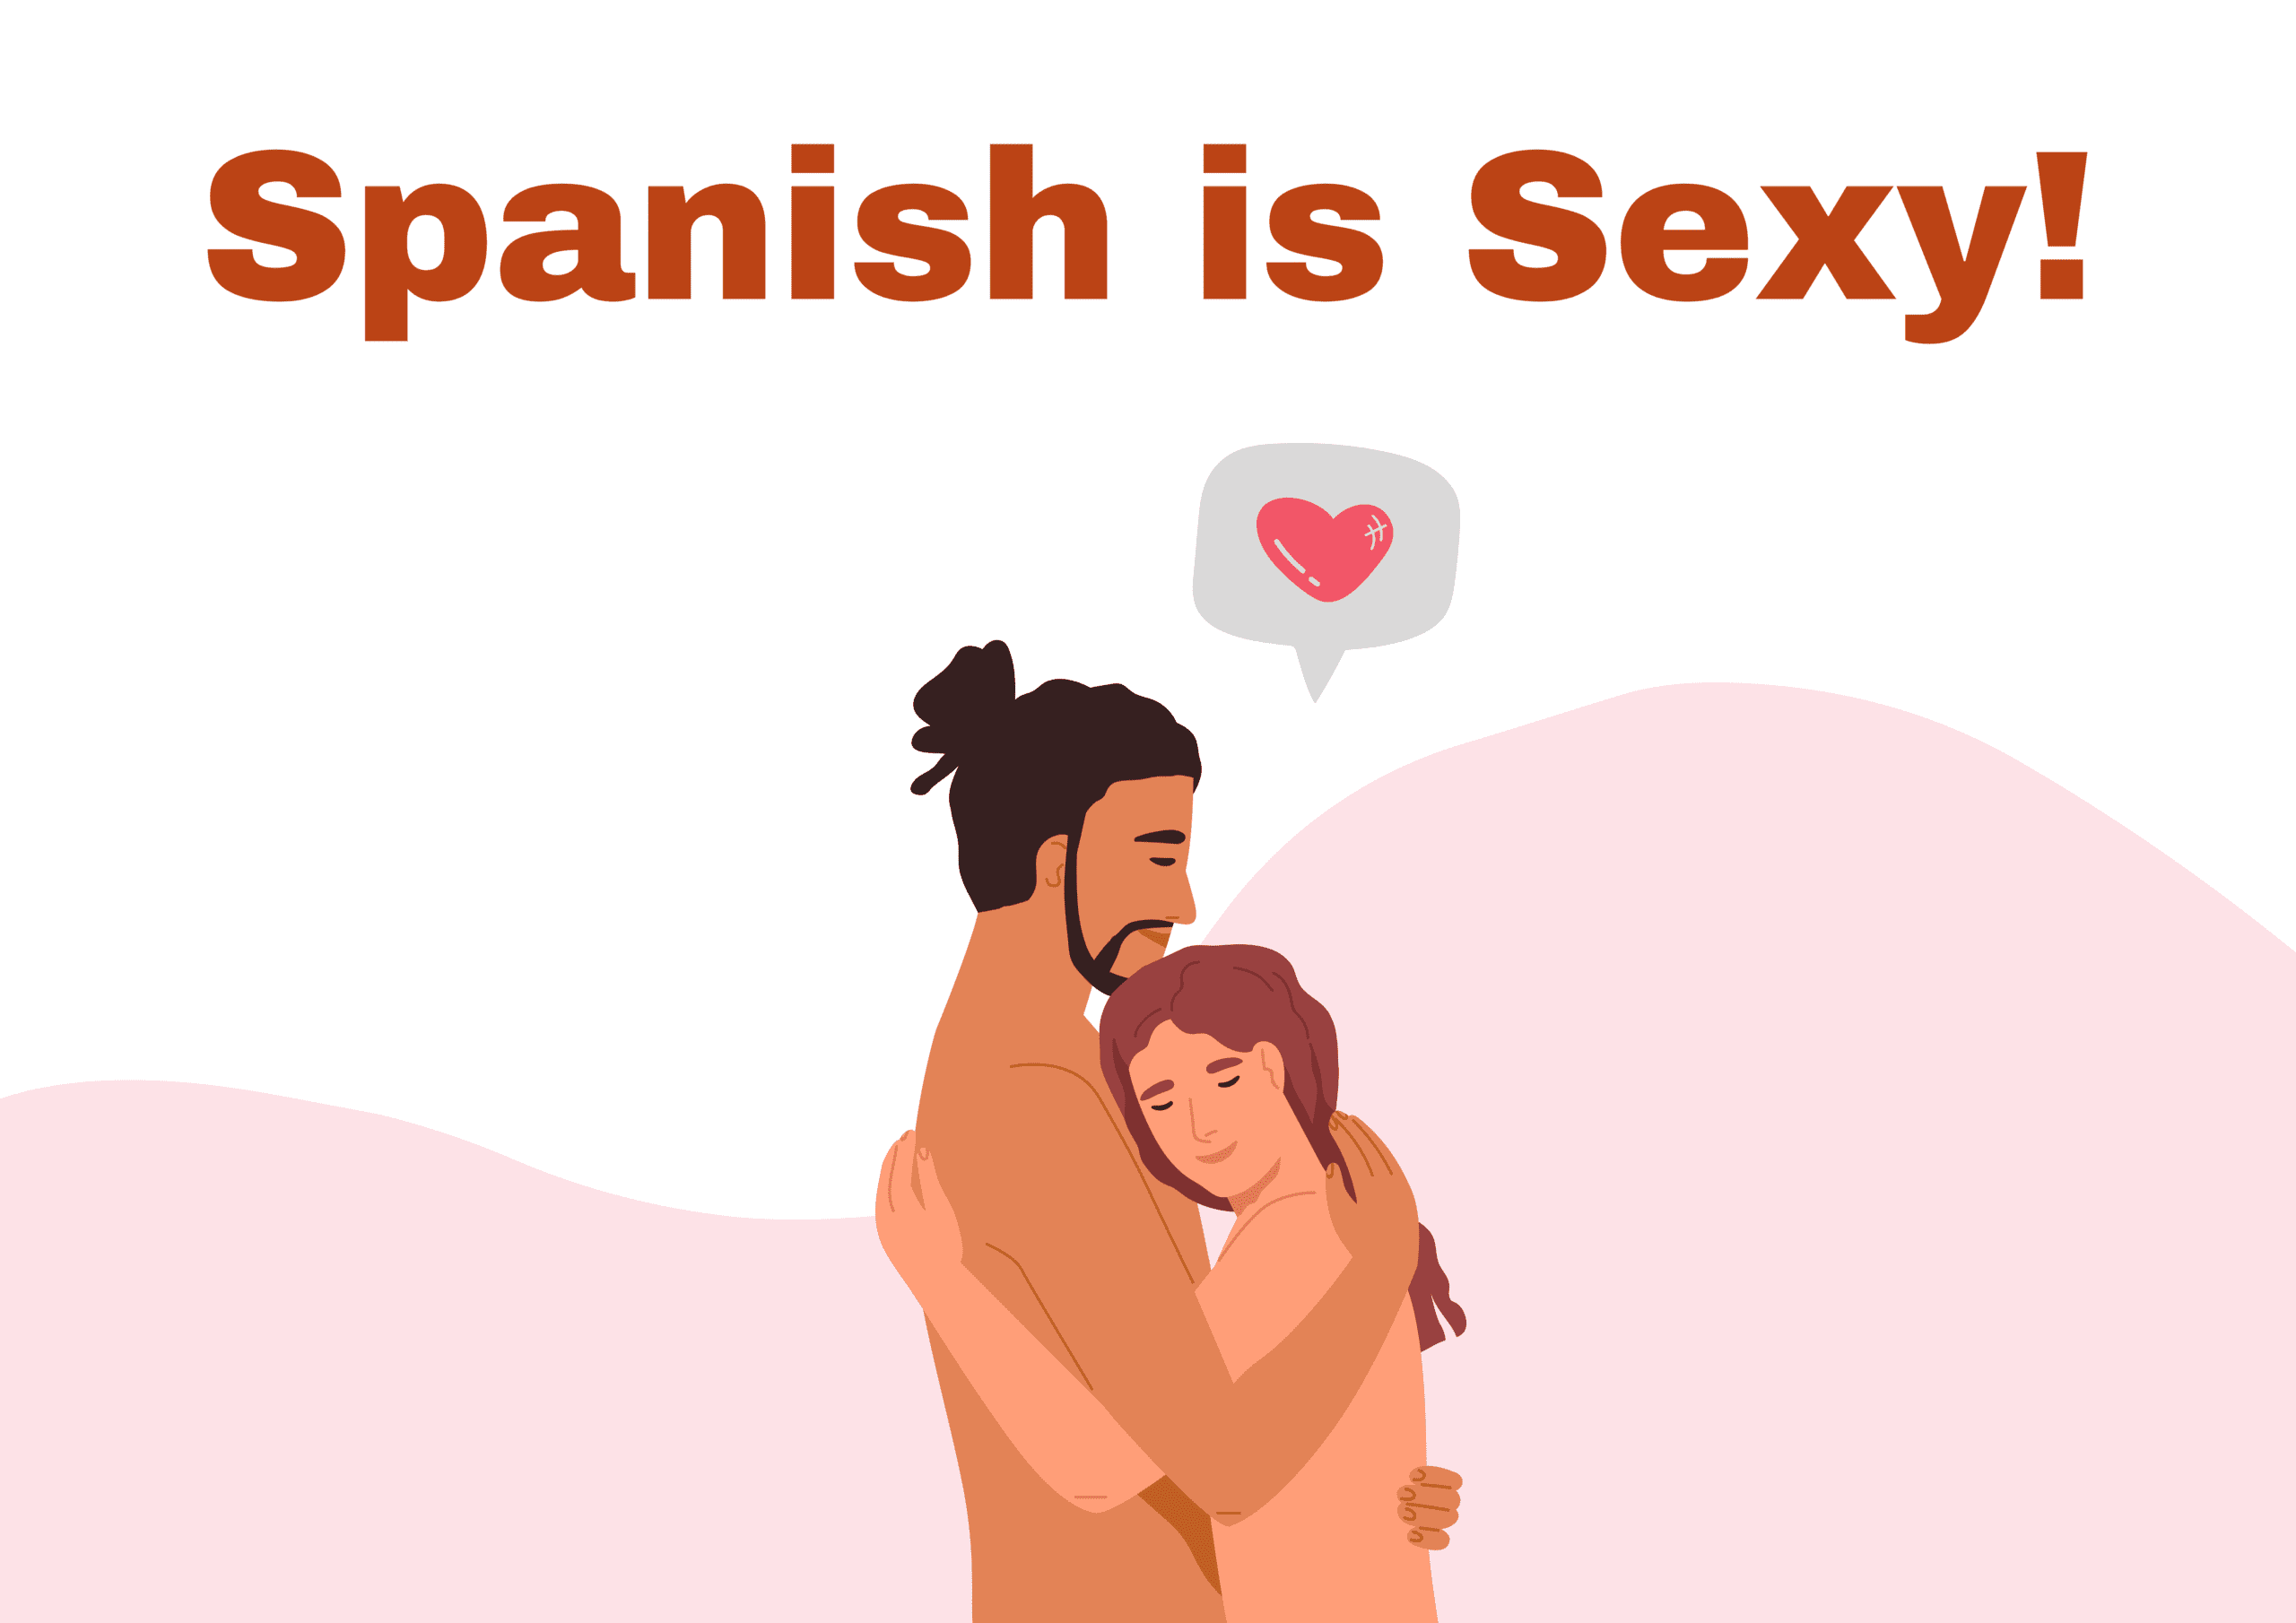 Things Spanish People Say in the Bedroom image